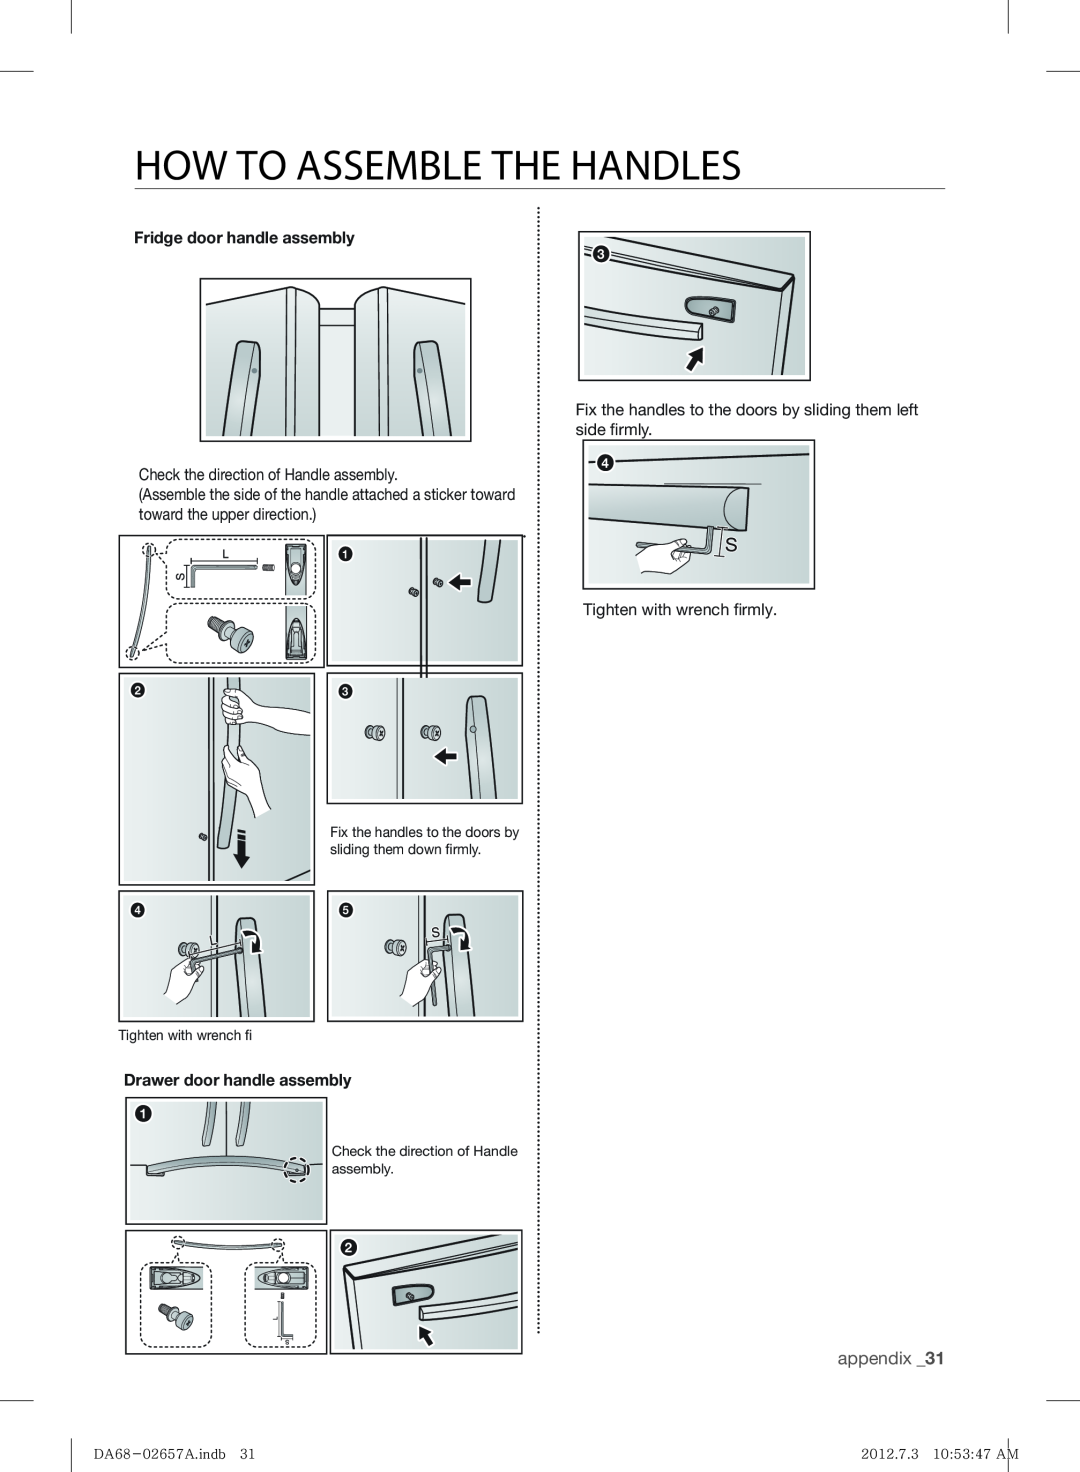 Samsung RF221NCTABC user manual How To Assemble The Handles, appendix 